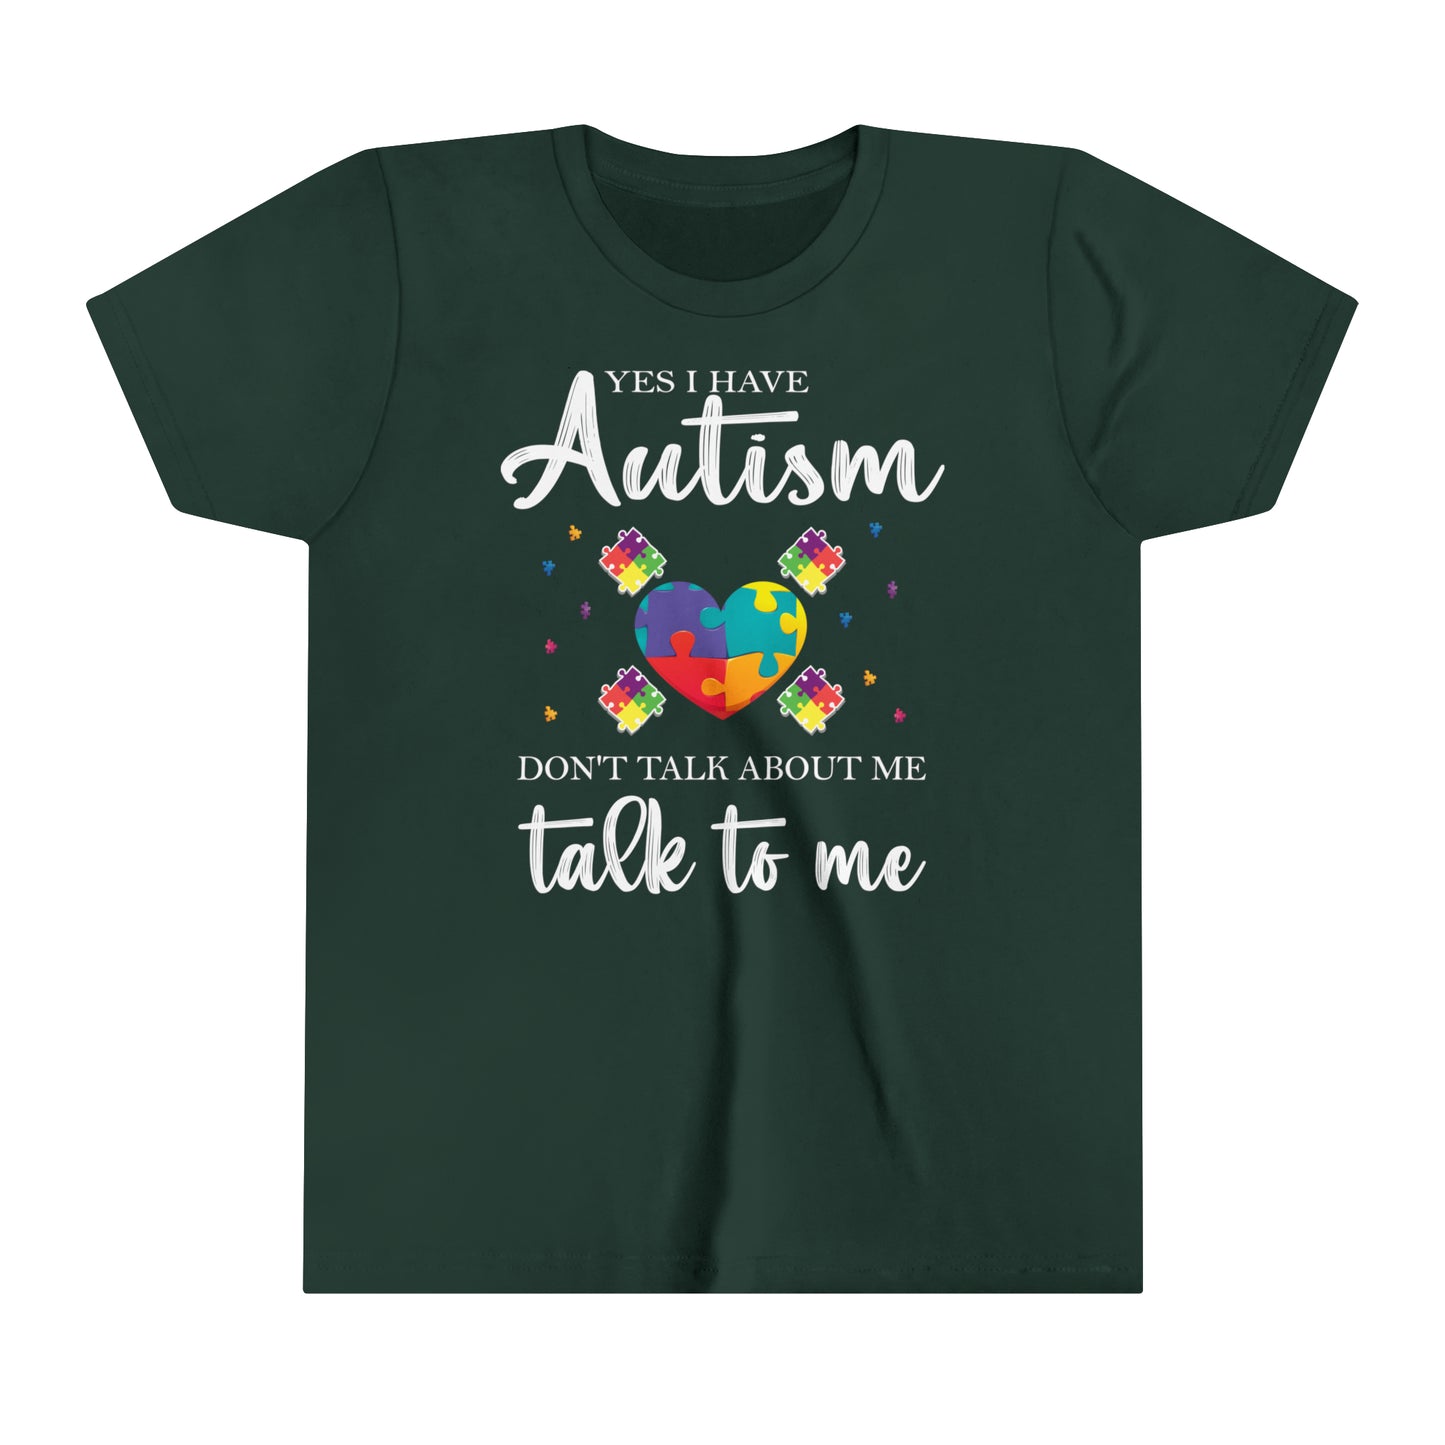 Talk to Me Autism Advocate Youth Shirt